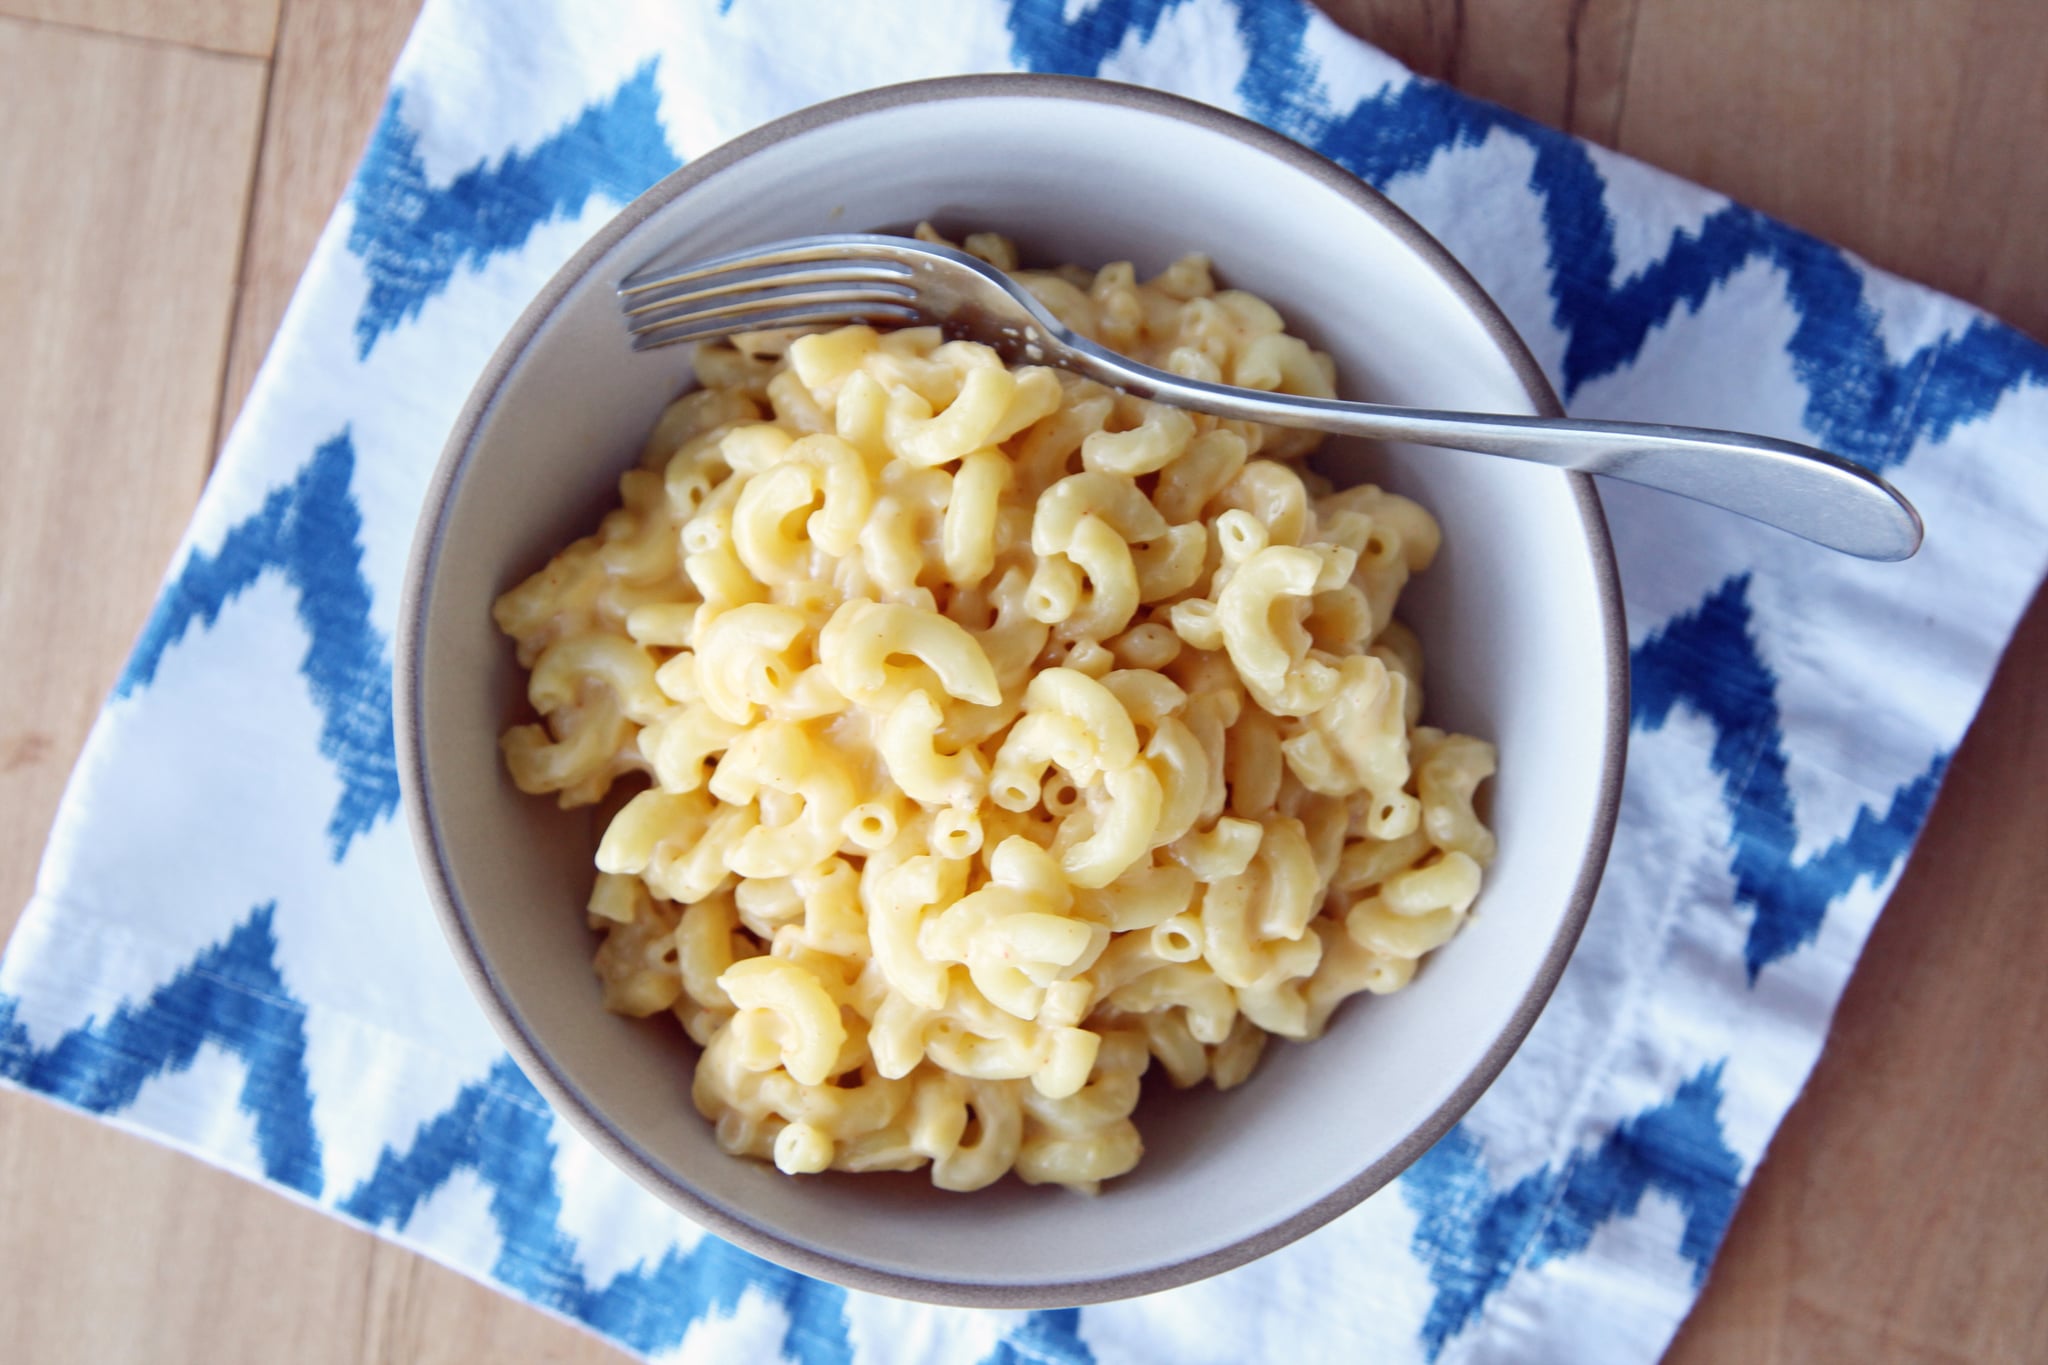 Alton Brown S Stove Top Mac N Cheese Recipe 13 Of Alton Brown S Most Popular Recipes From The Original Good Eats Popsugar Food Photo 6